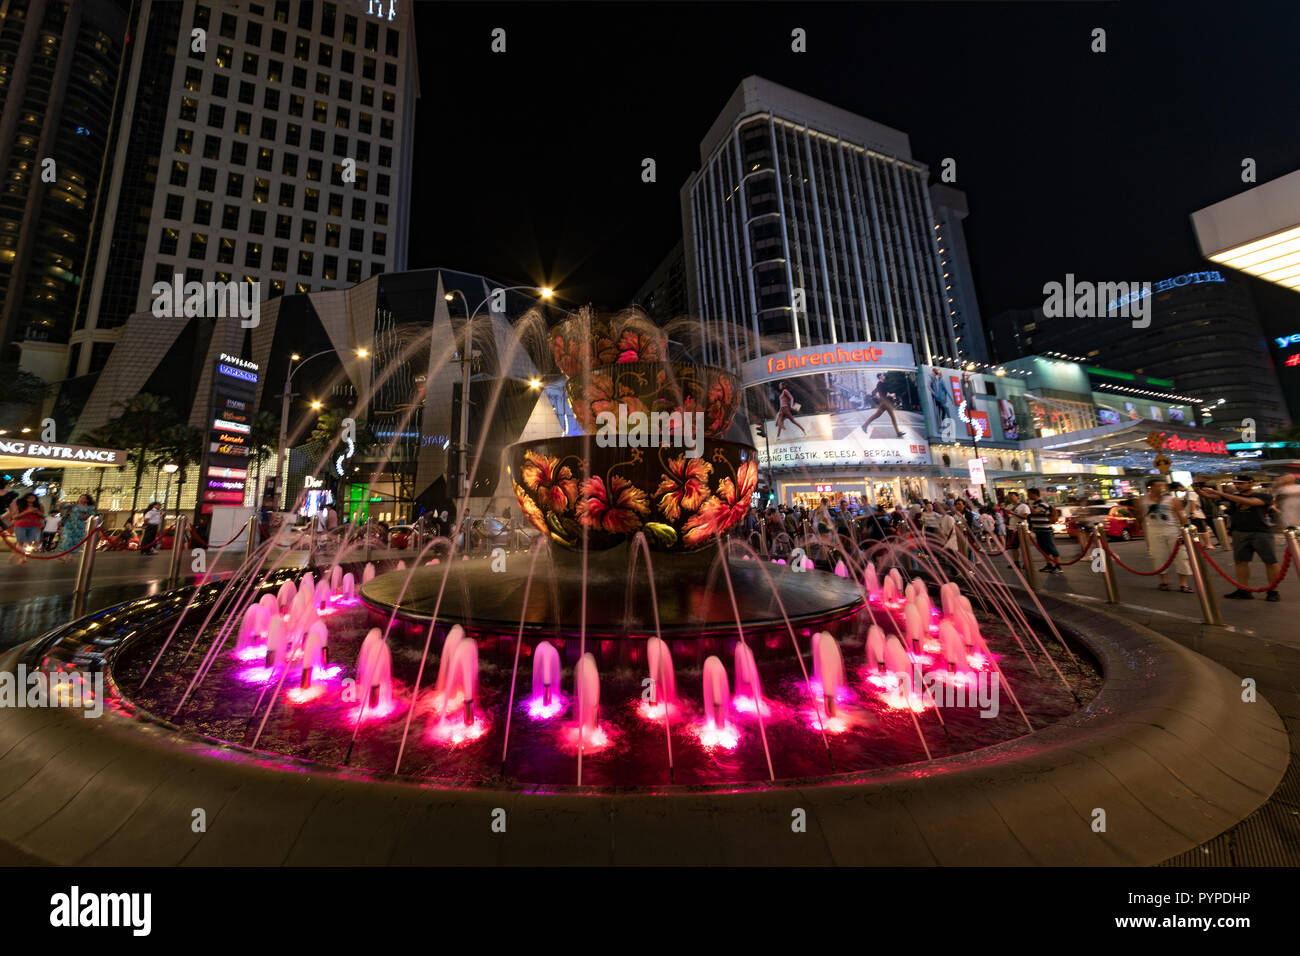 KUALA LUMPUR, 16 August 2018 - colorful fountain in front of the busy and crowded 'Pavilion' shopping mall of the city at night Stock Photo